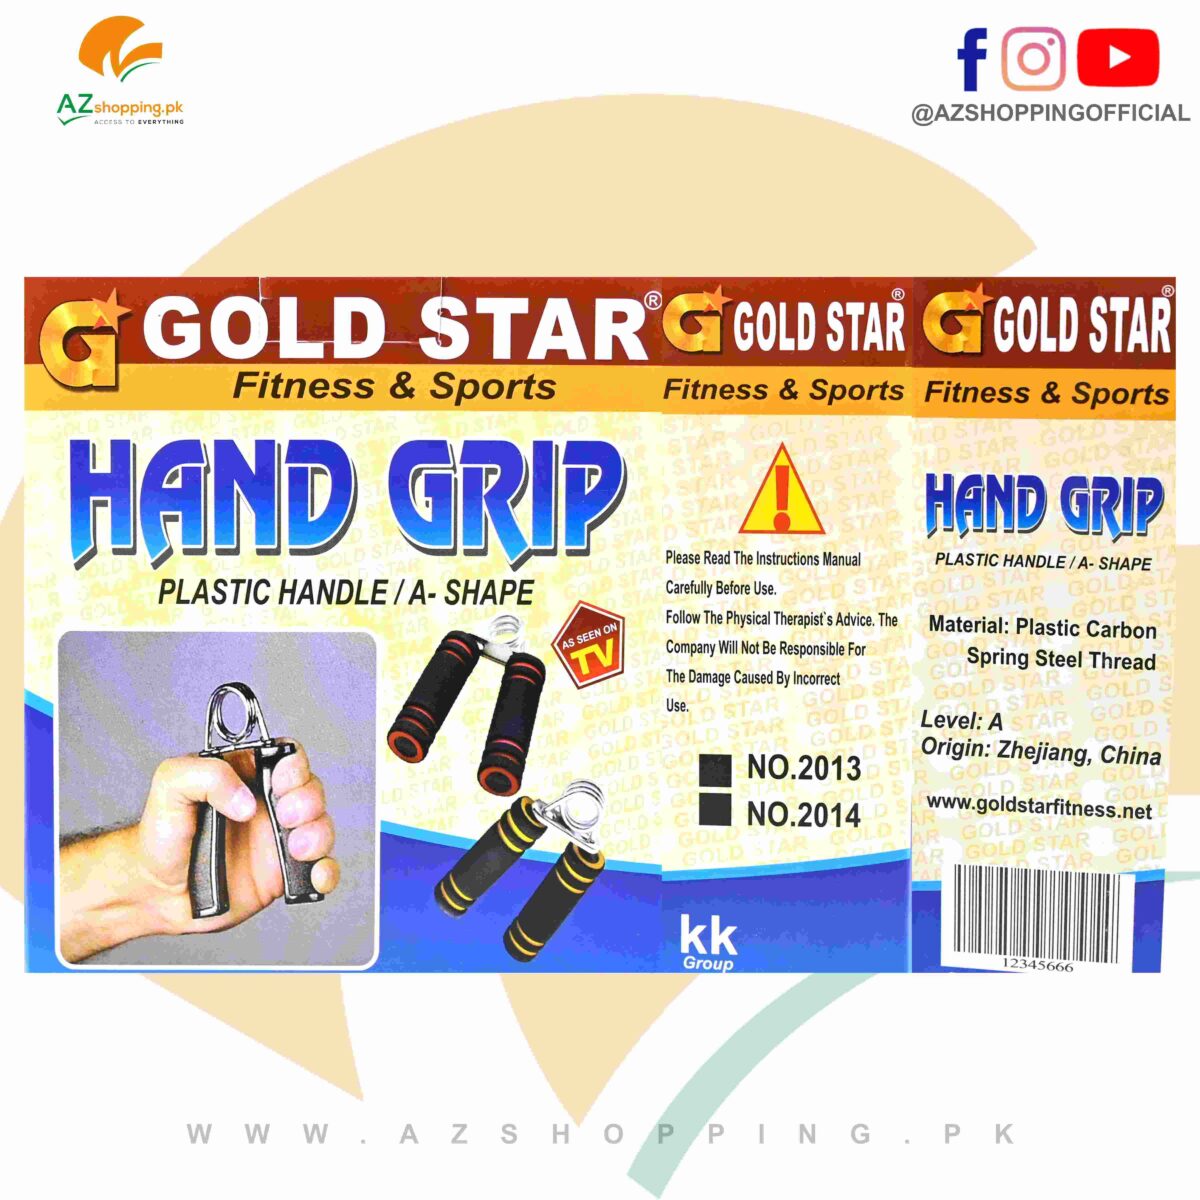 Foam Hand Grip A-Shaped Strengthener Set of 2 for Increasing Wrist Power Strength